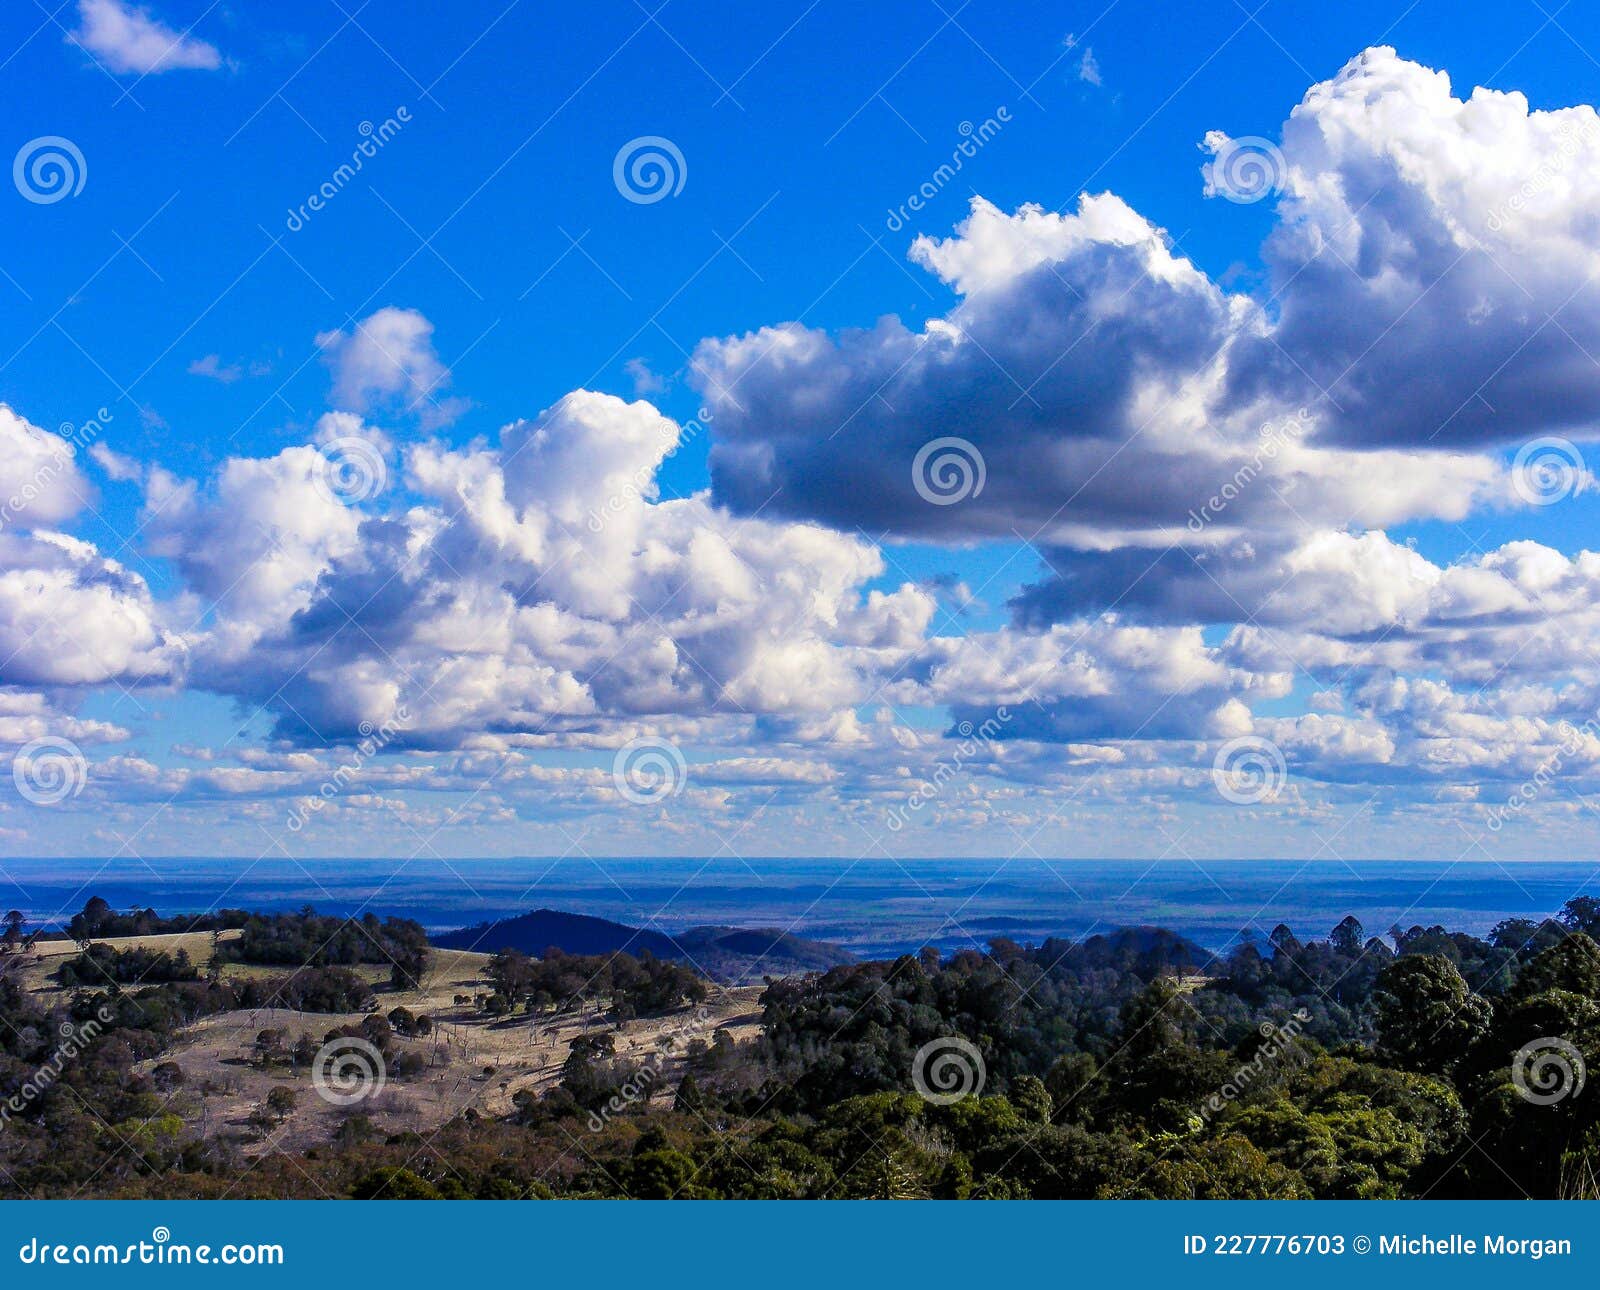 scenic view with green hills and blue sky with white fluffy clouds 2.